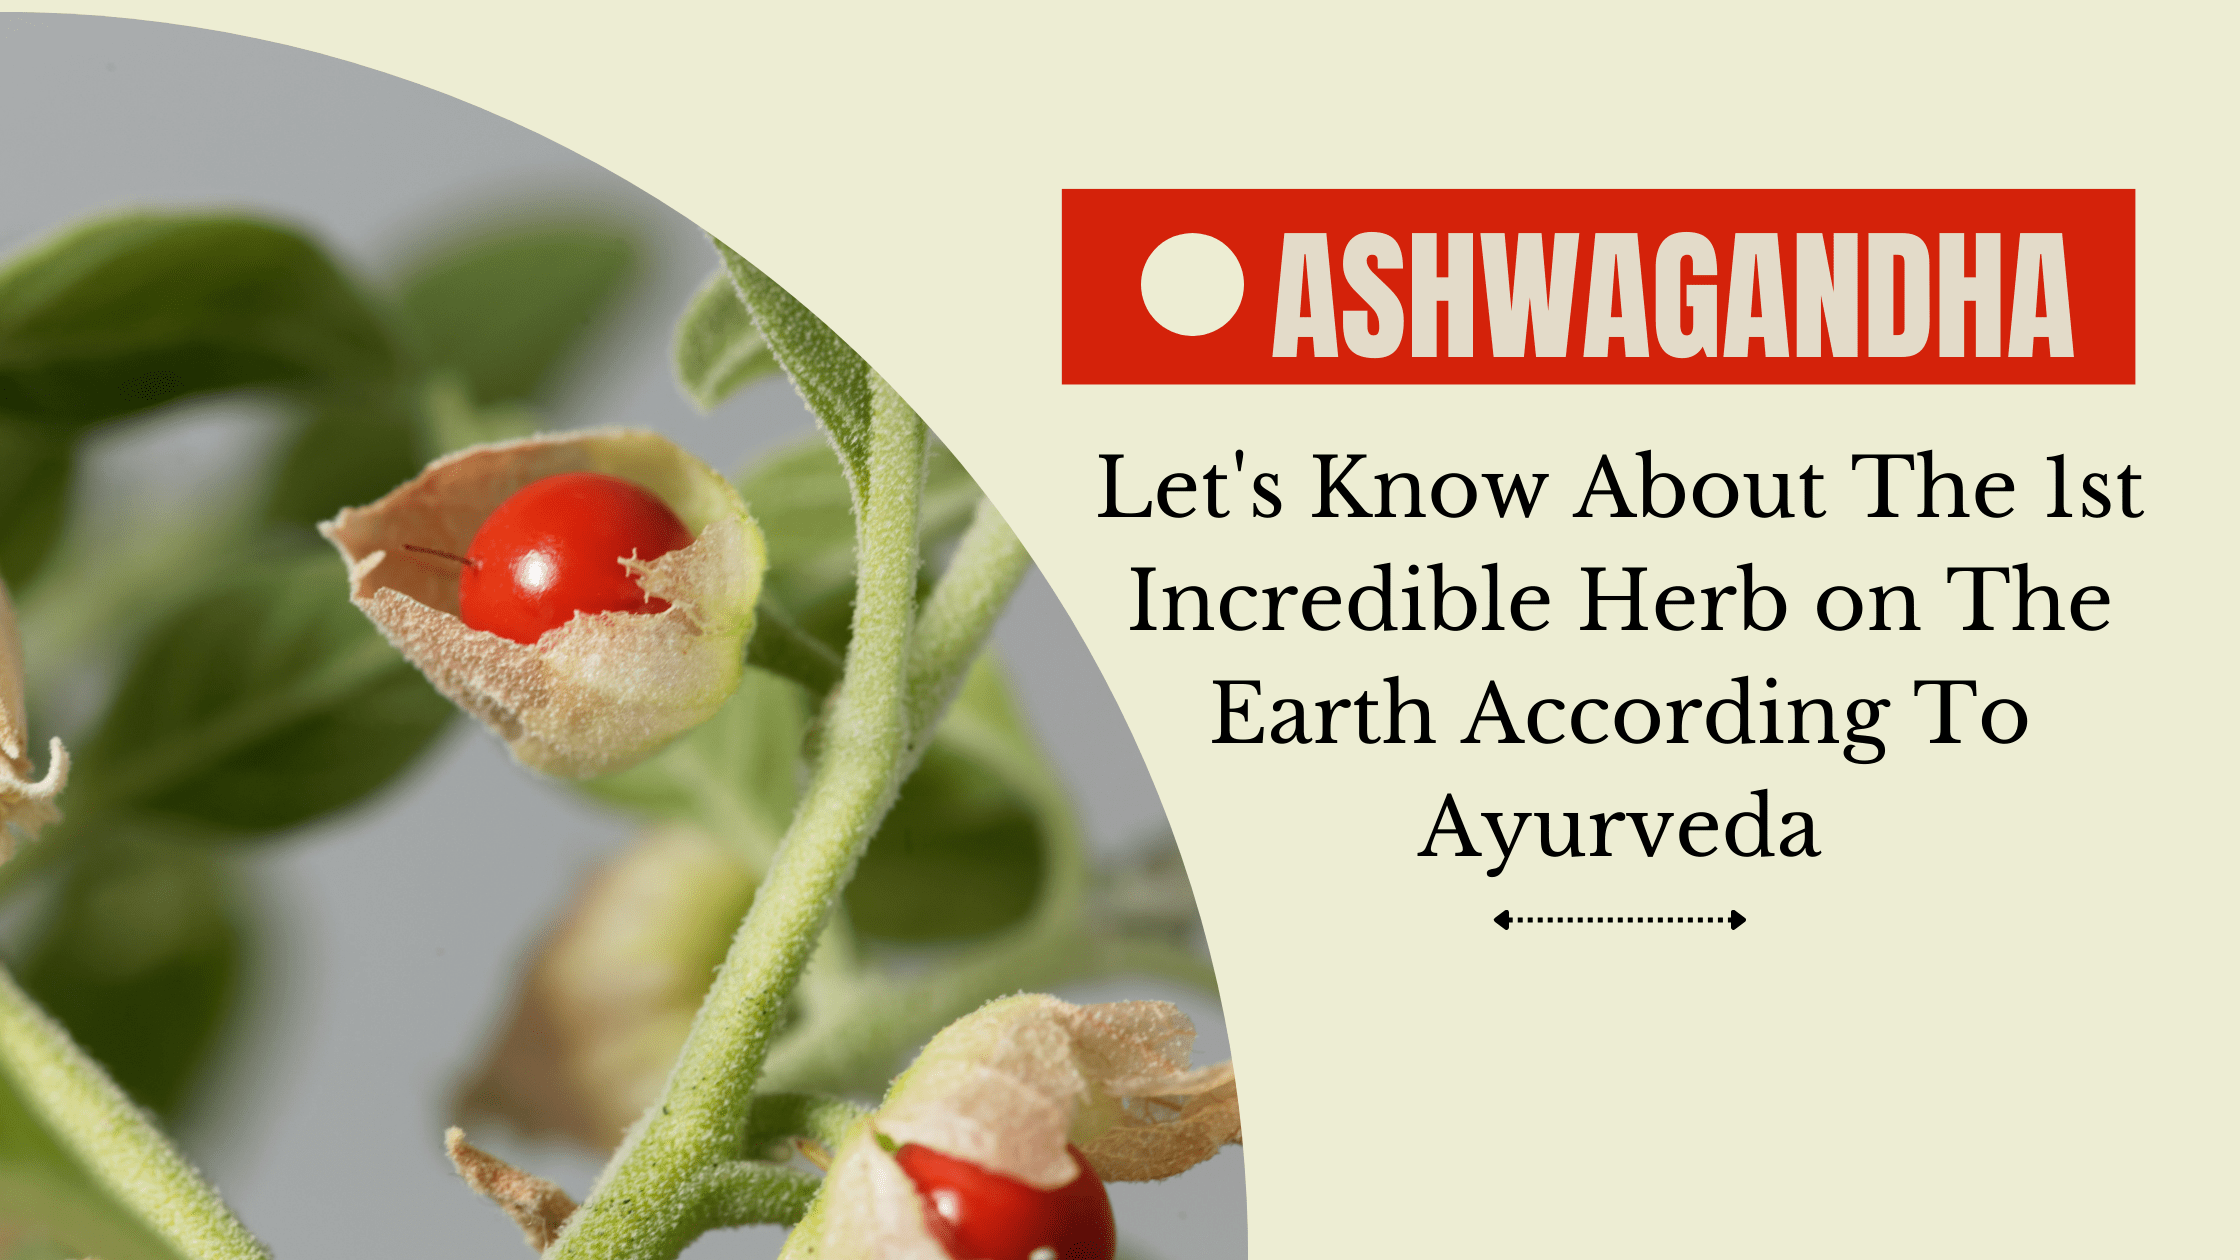 Let's Know About The Incredible Herbs of Ashwagandha on The Earth According To Ayurveda